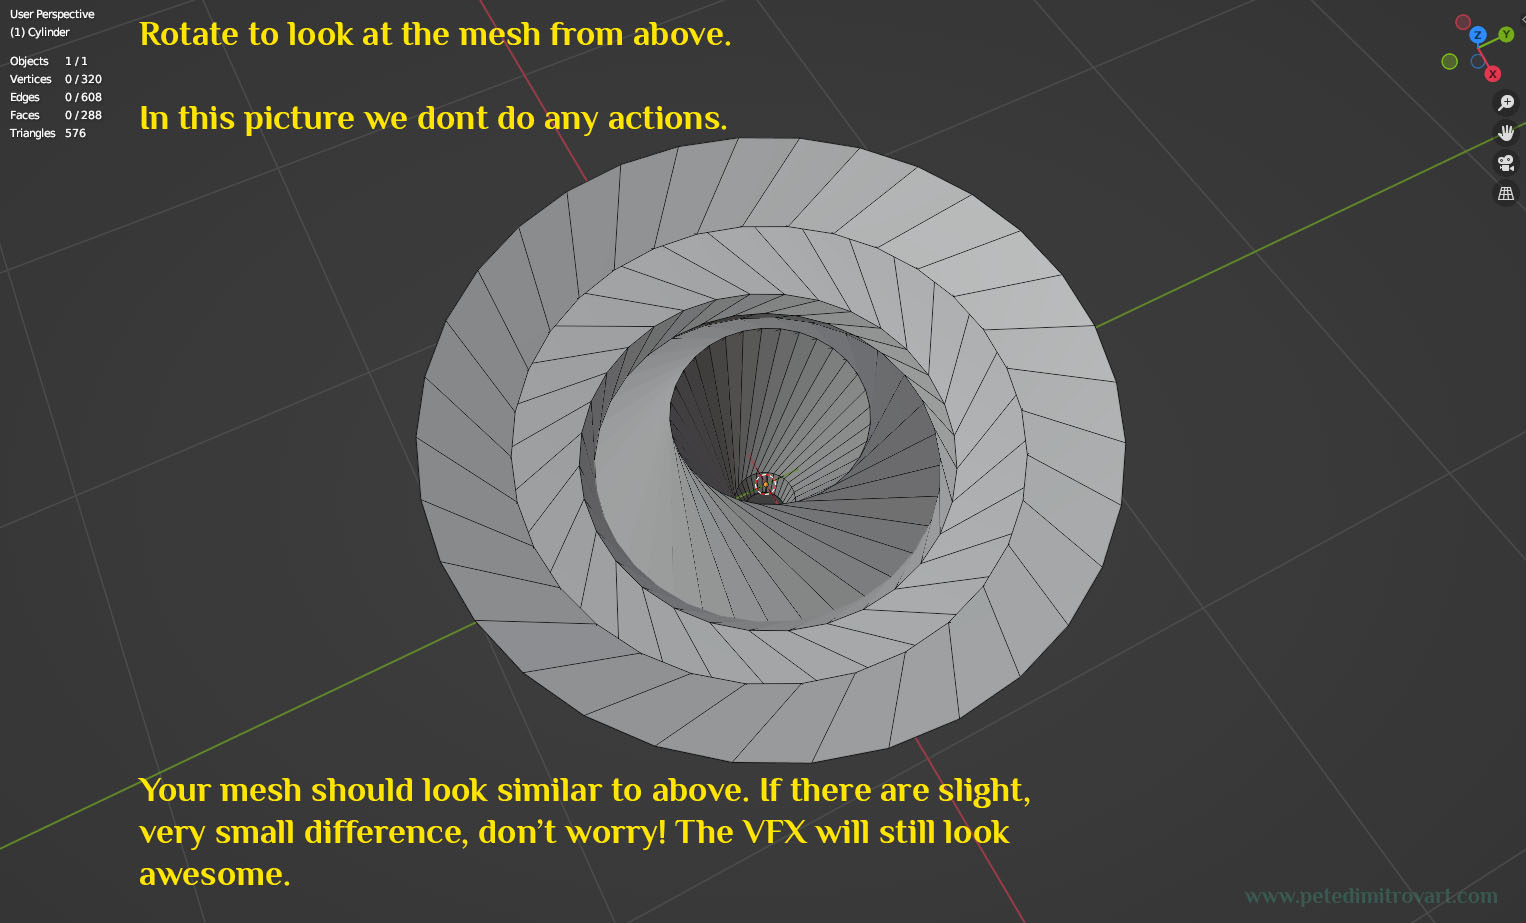 Image with yellow text identical to paragraph above. The mesh is seen from the very top, displaying all of the twists and turns in different directions thanks to the wireframe look.